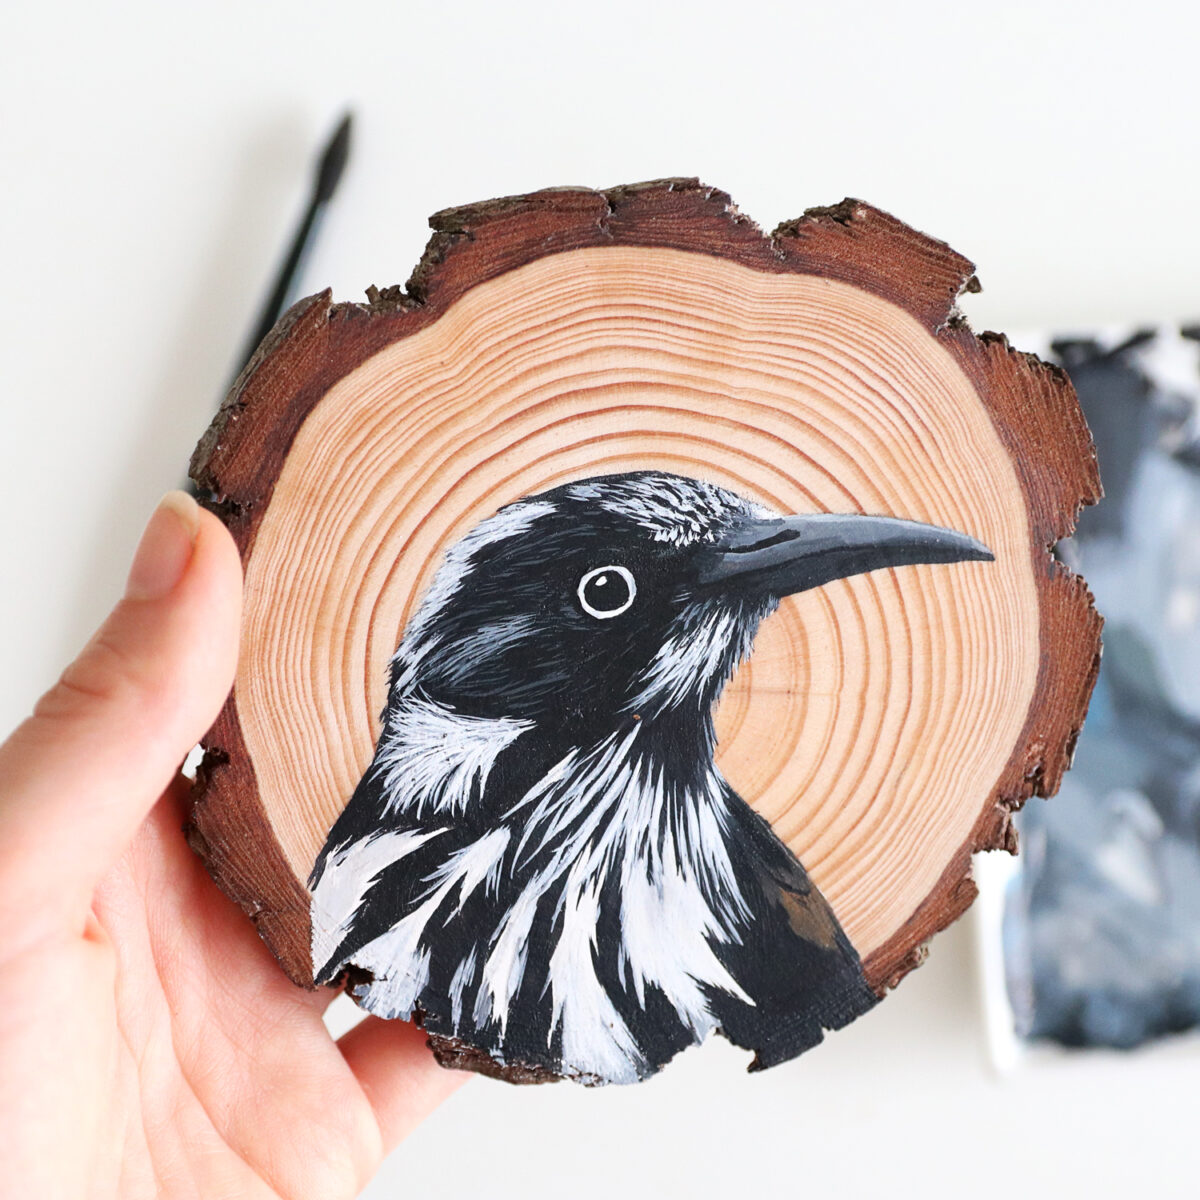 100 Days Of Birds A Marvelous Series Of Gouache On Wood Paintings By Deanna Maree (16)